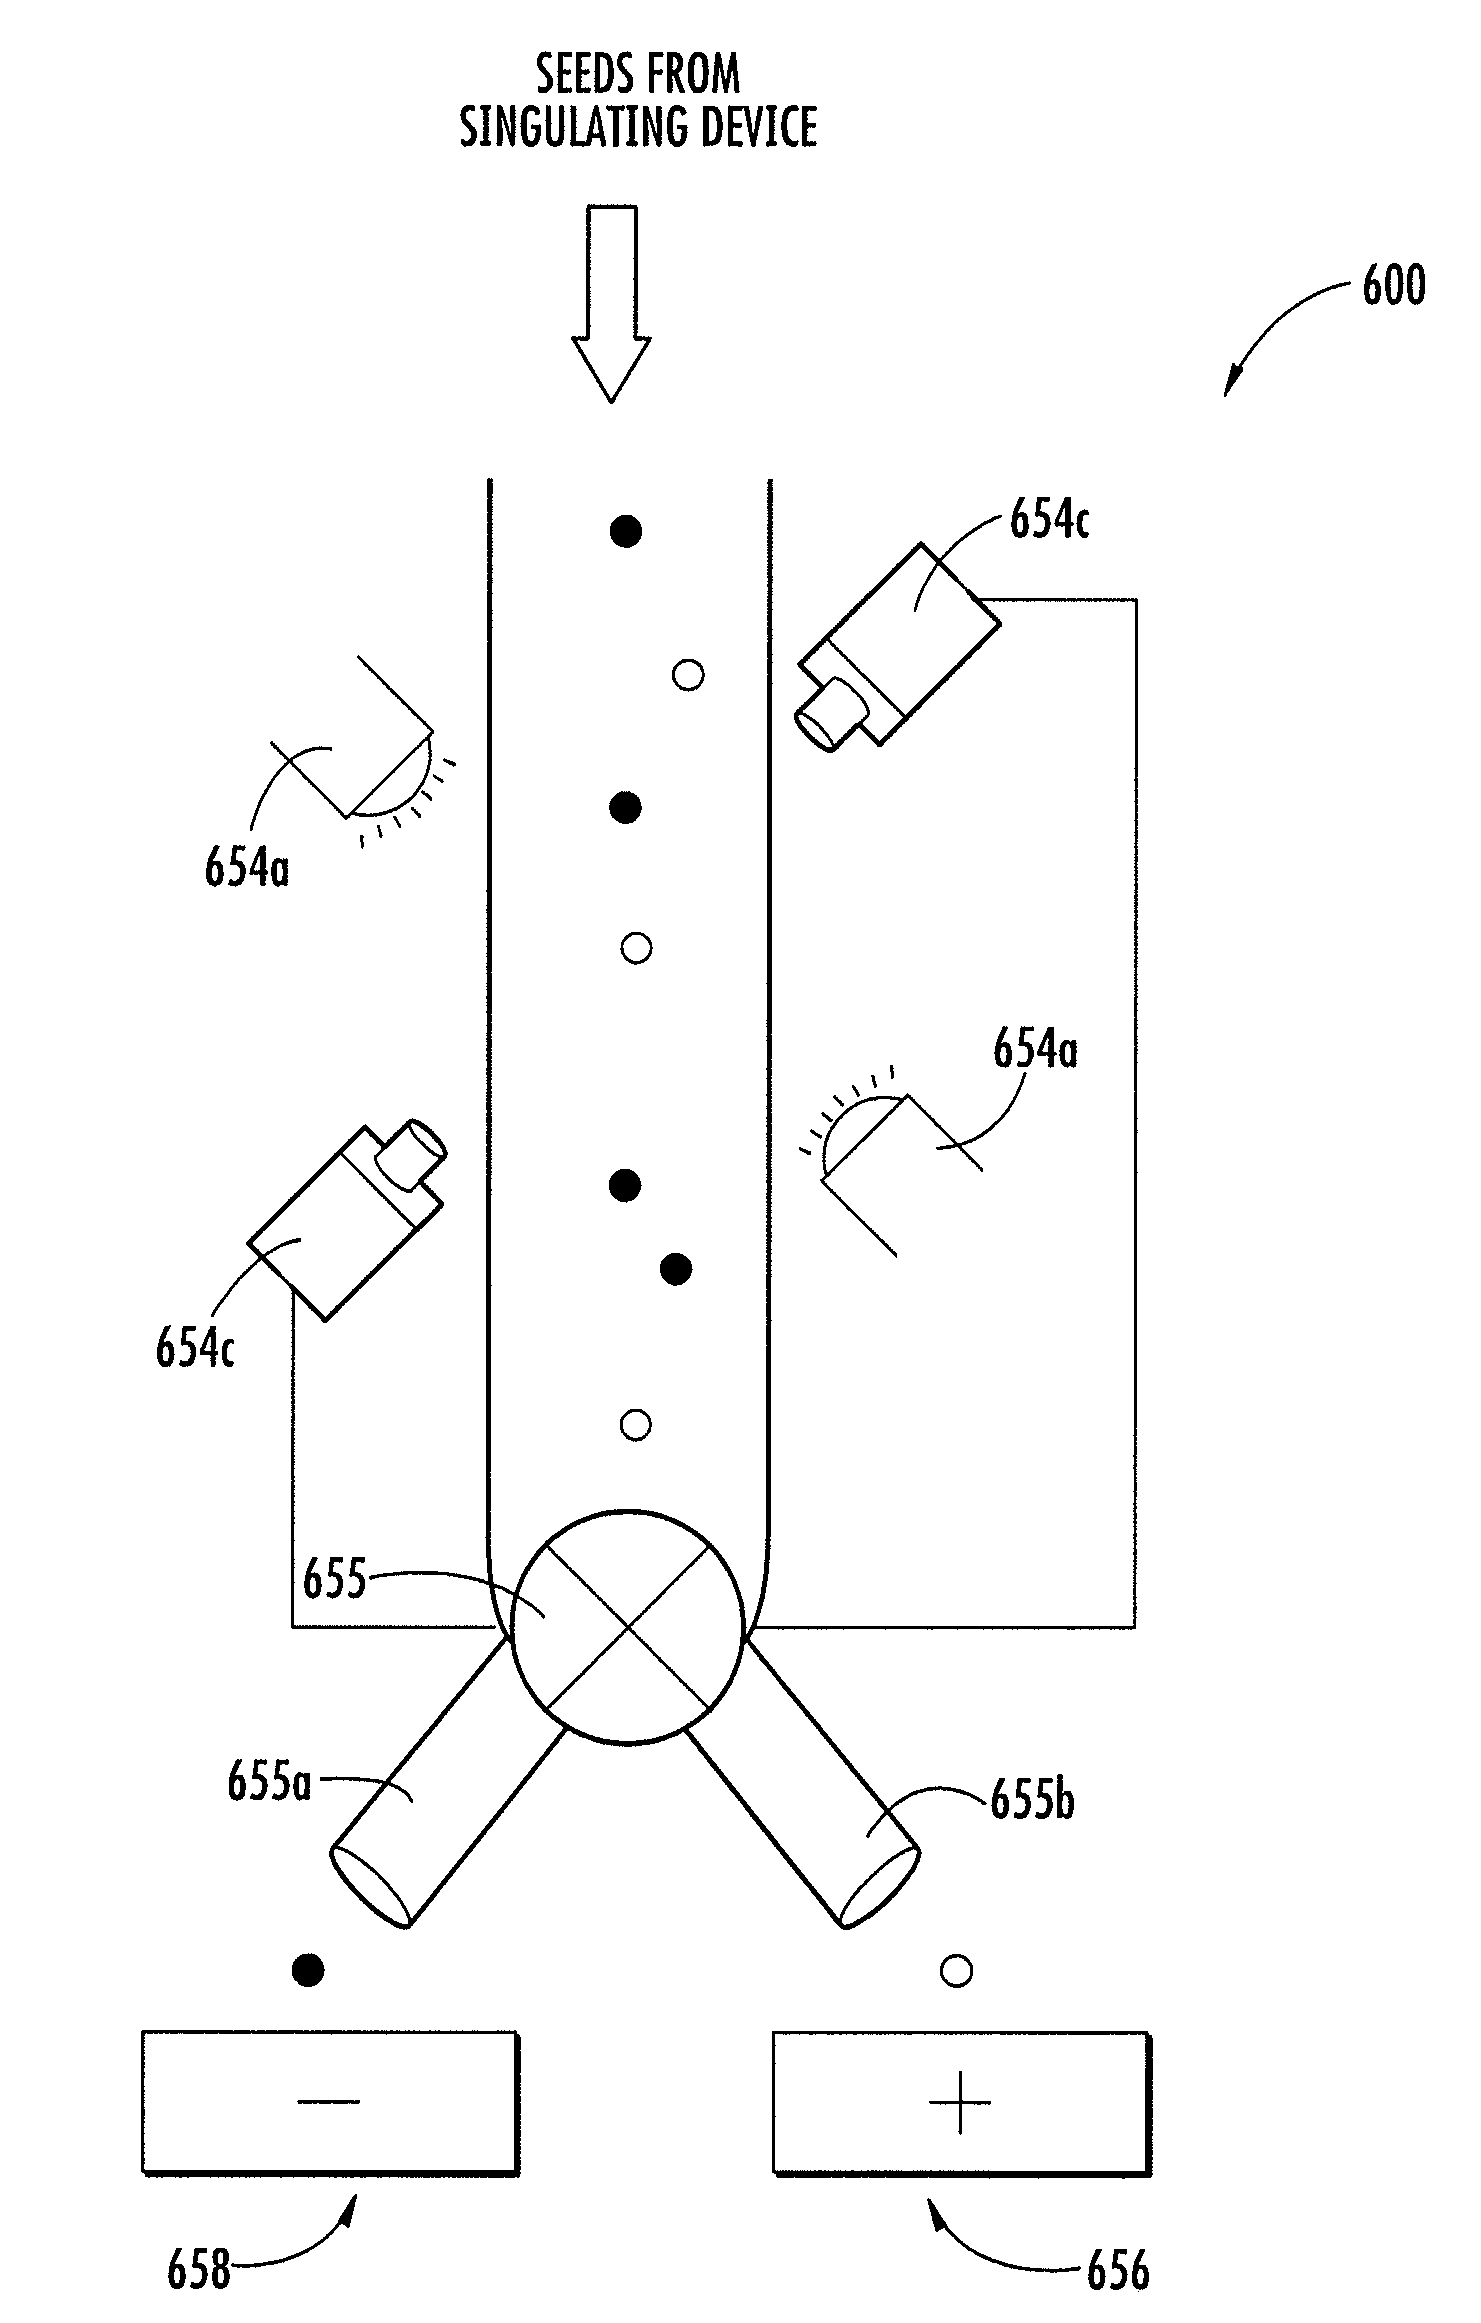 Method and computer program product for distinguishing and sorting seeds containing a genetic element of interest